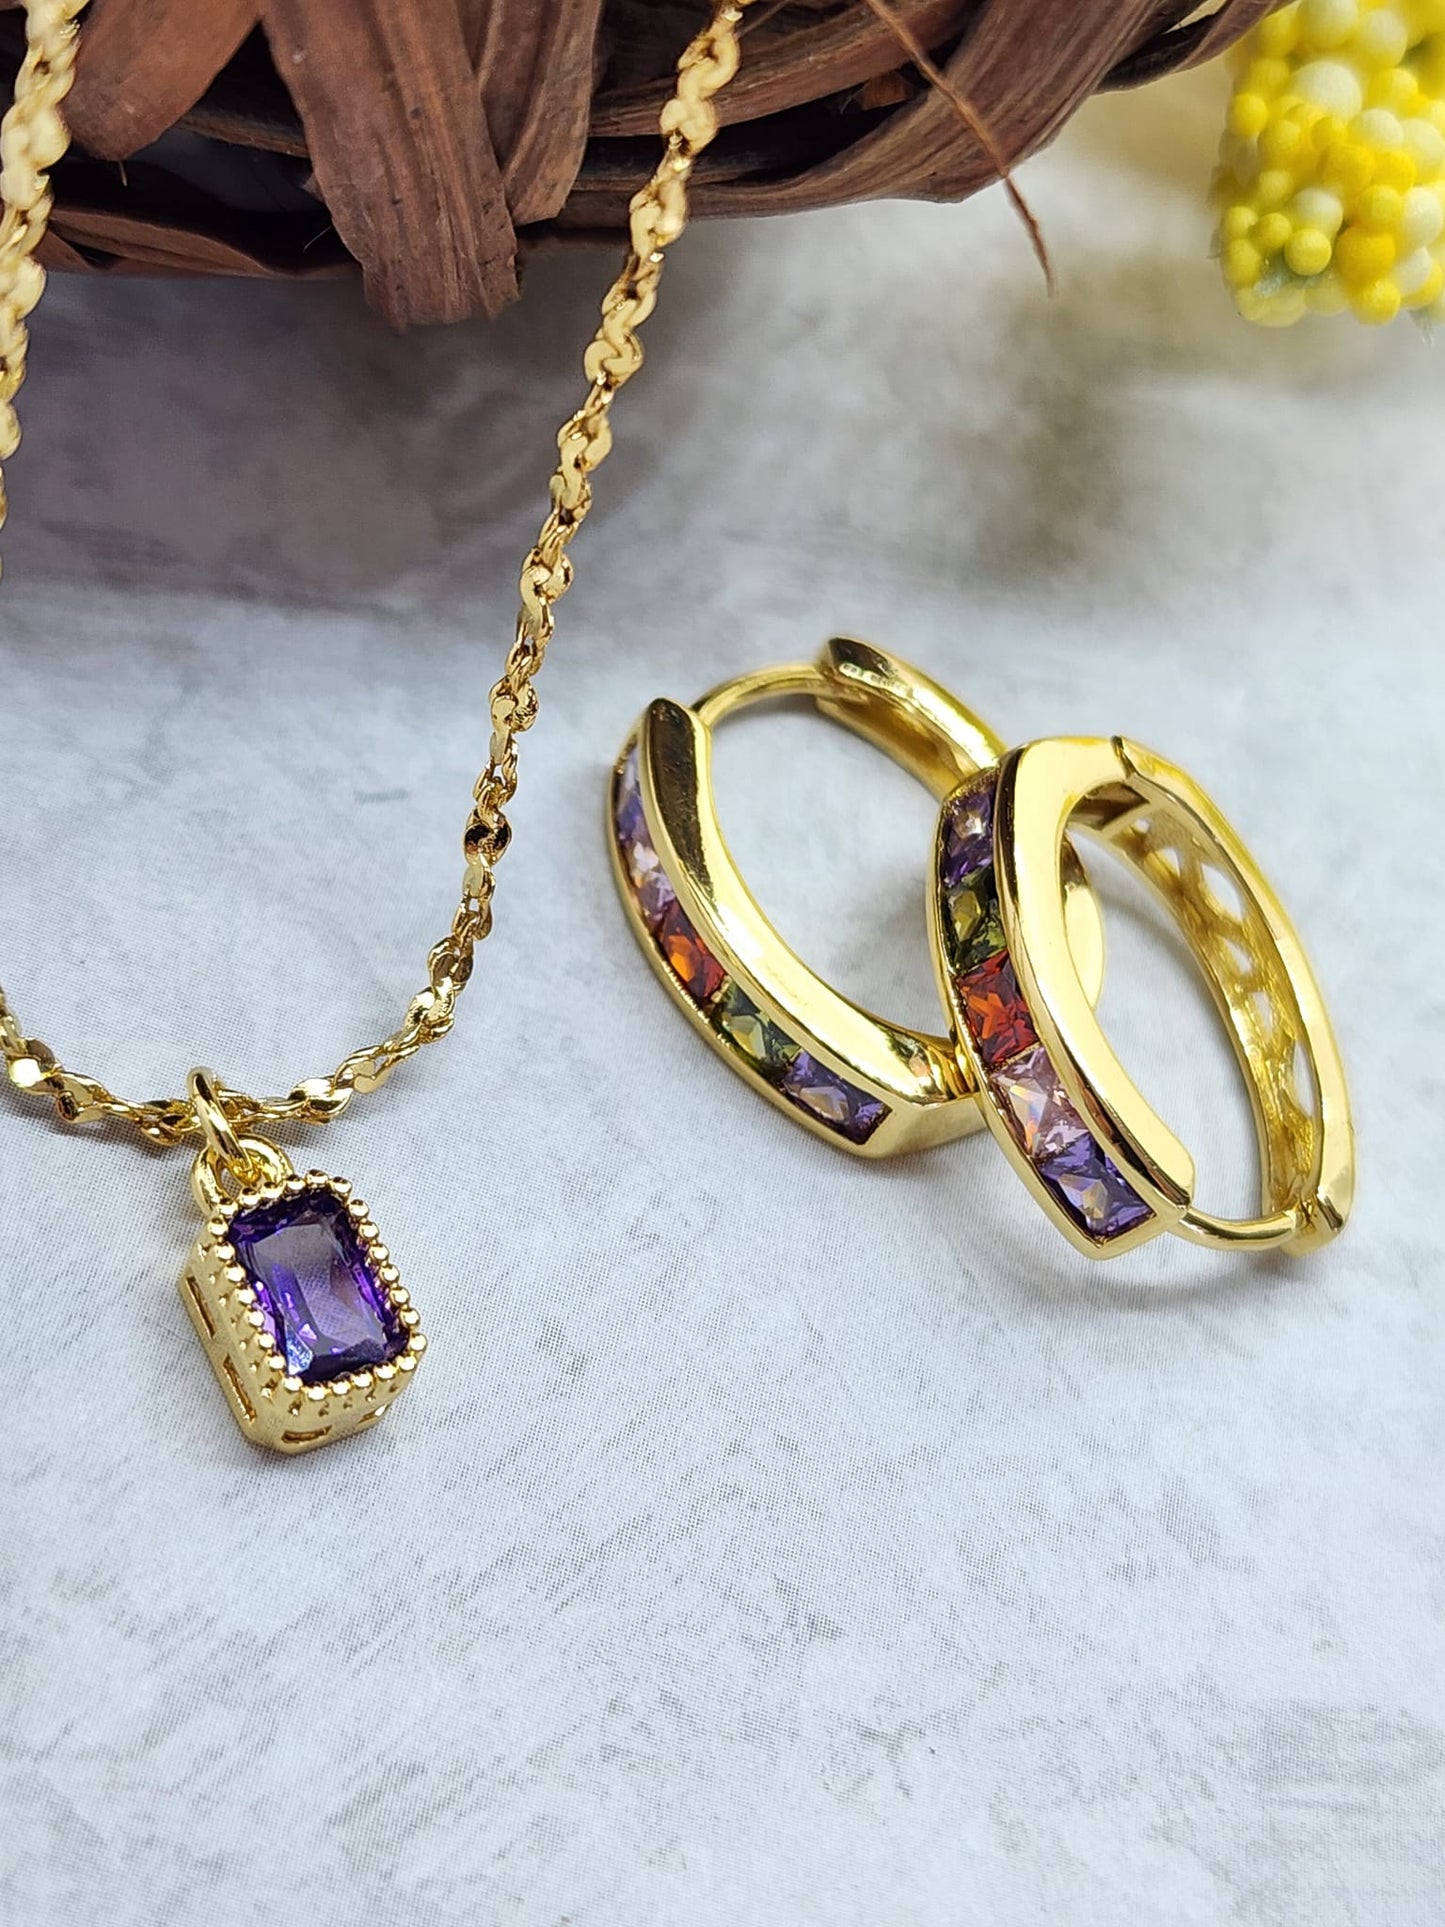 Birthstone Necklace and Earring Set 18K Gold Plated - Amethyst Stone w/Multi Color Earrings